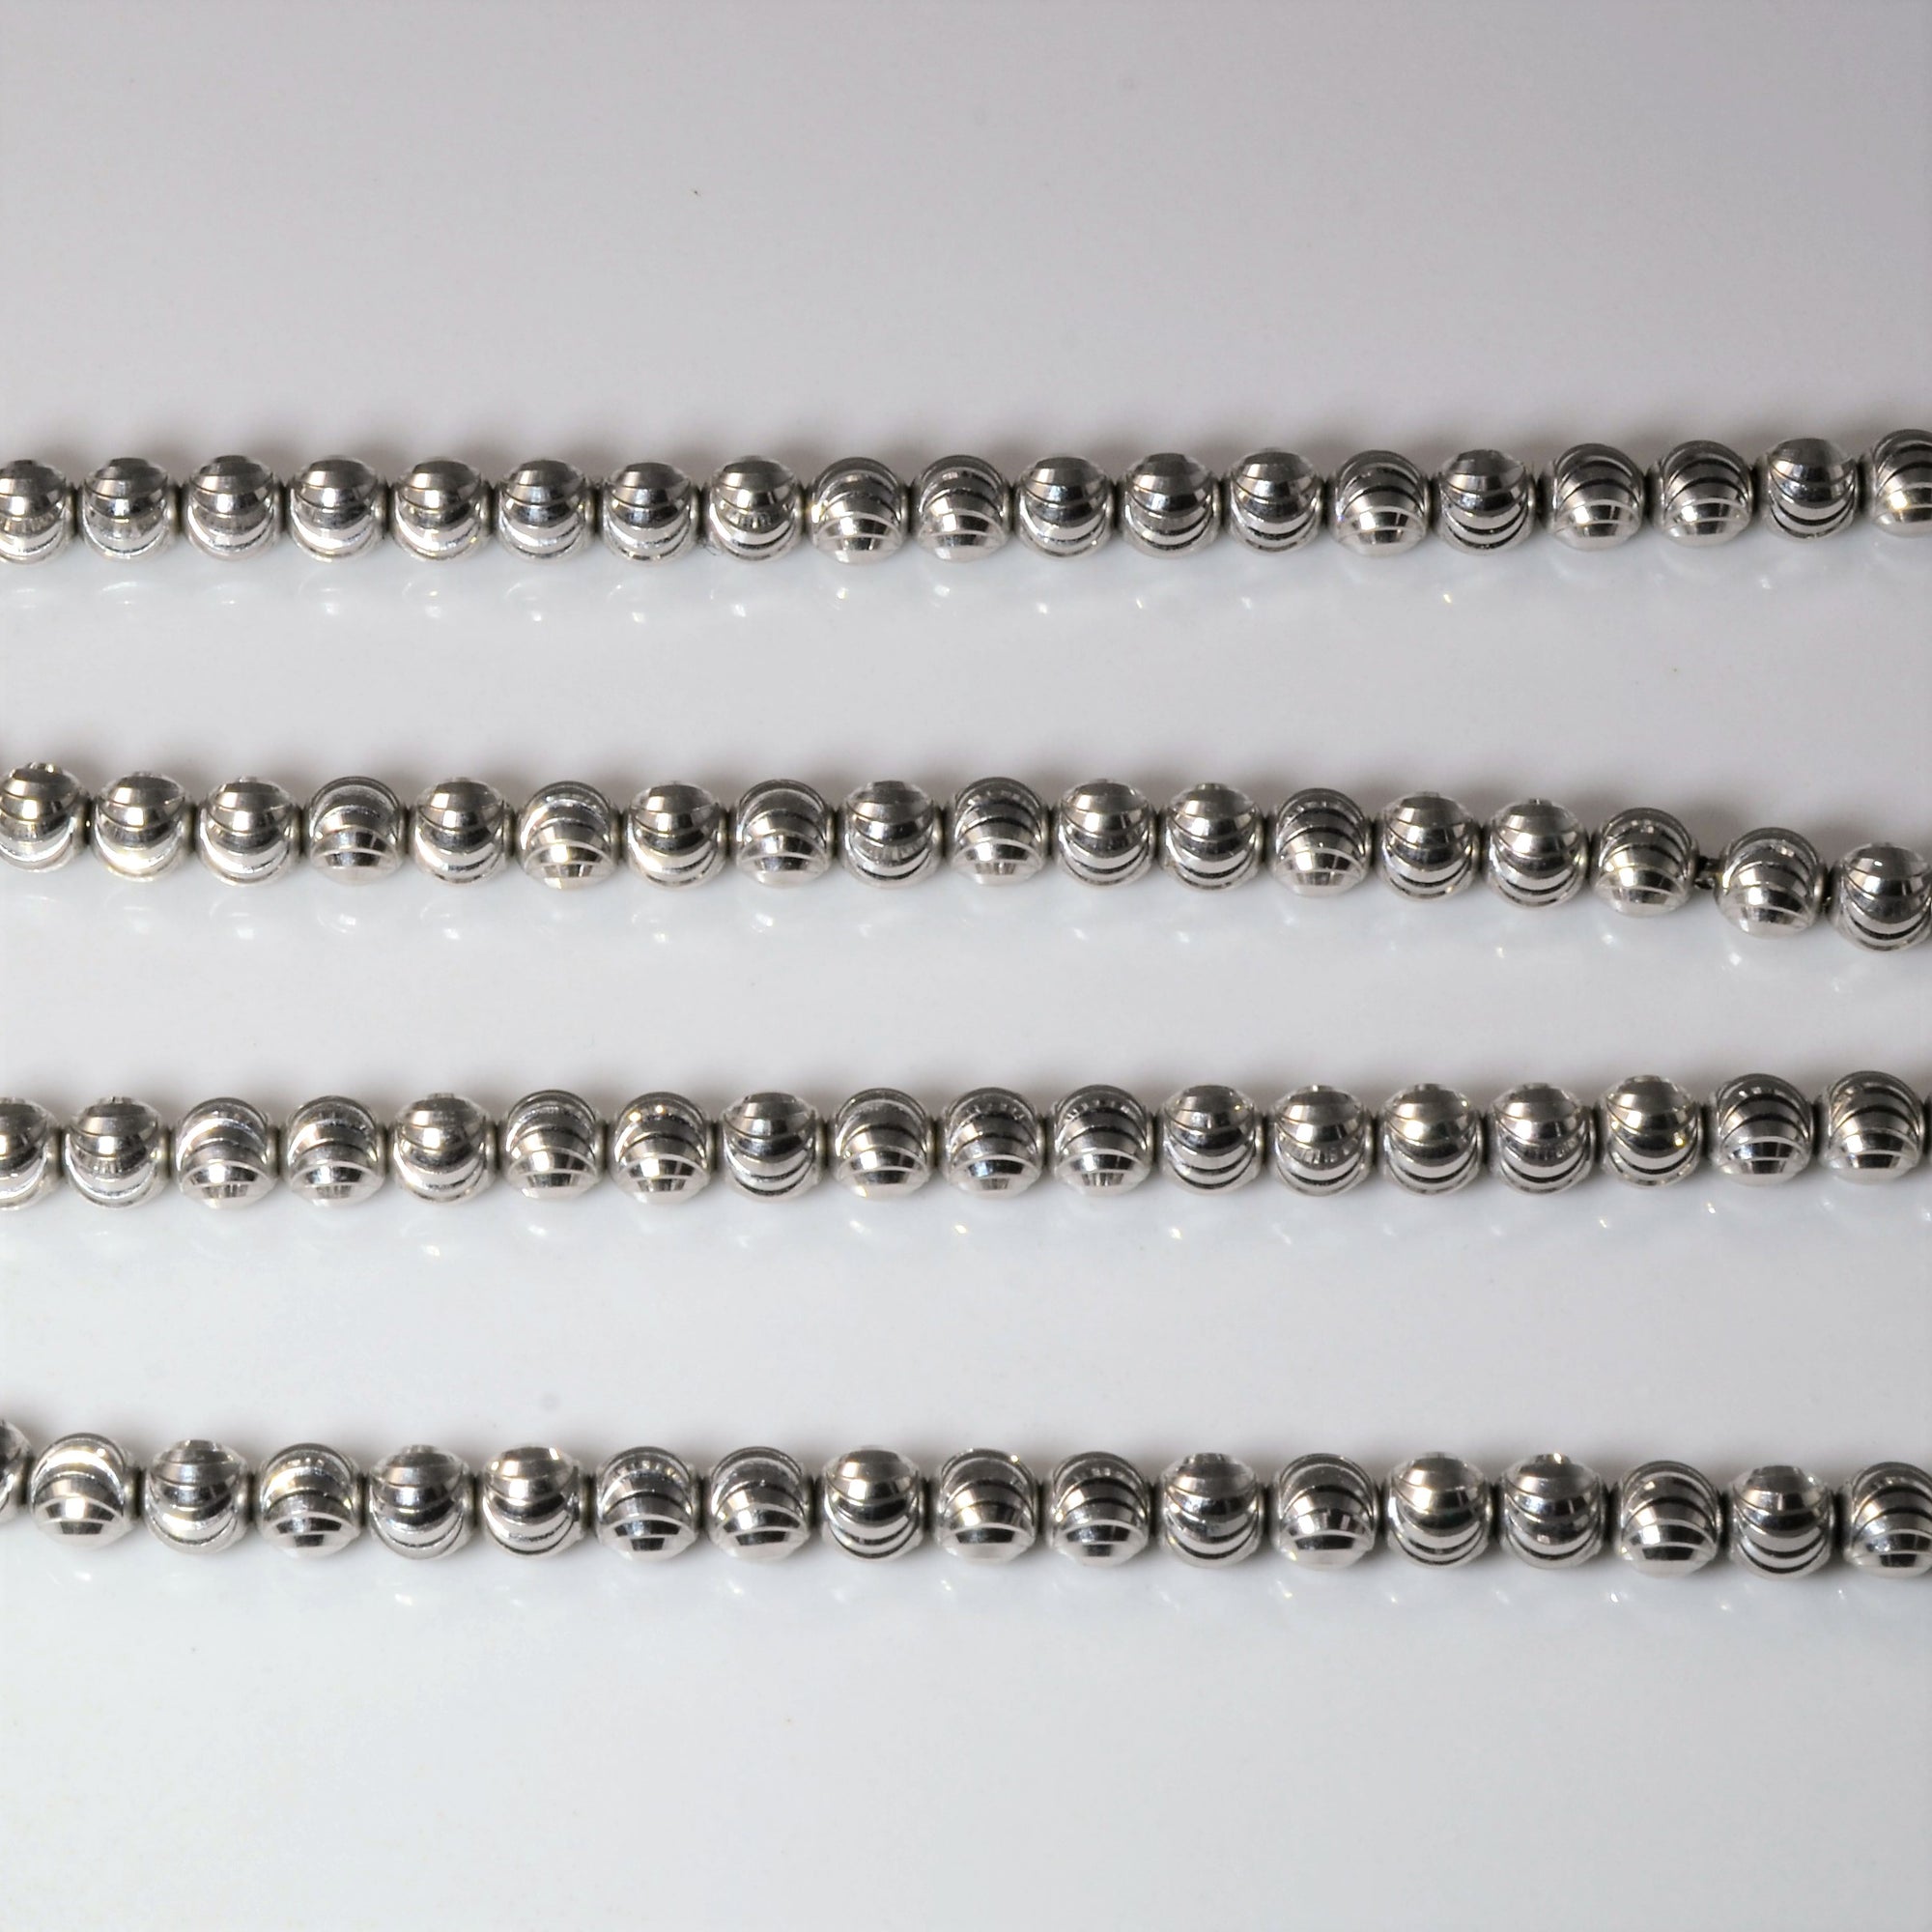 Textured White Gold Bead Necklace | 24